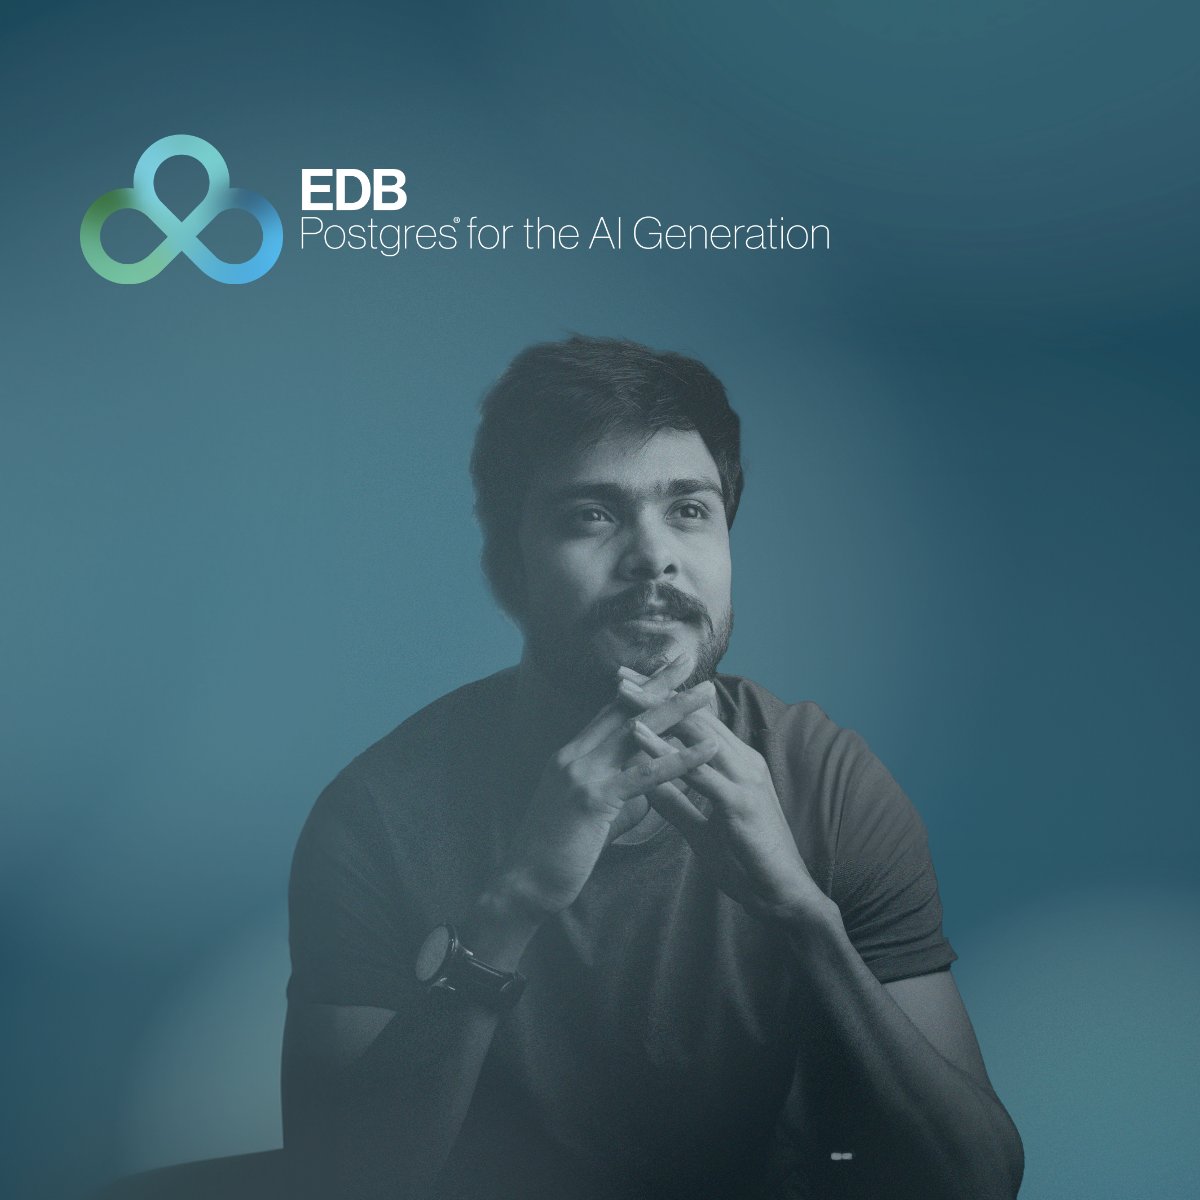 Introducing the next evolution of EDB: EDB Postgres AI: The industry's first intelligent platform for transactional, analytical, and AI workloads. Our new product & brand reflect the idea that Postgres can solve today's complex data challenges. Learn more: enterprisedb.com